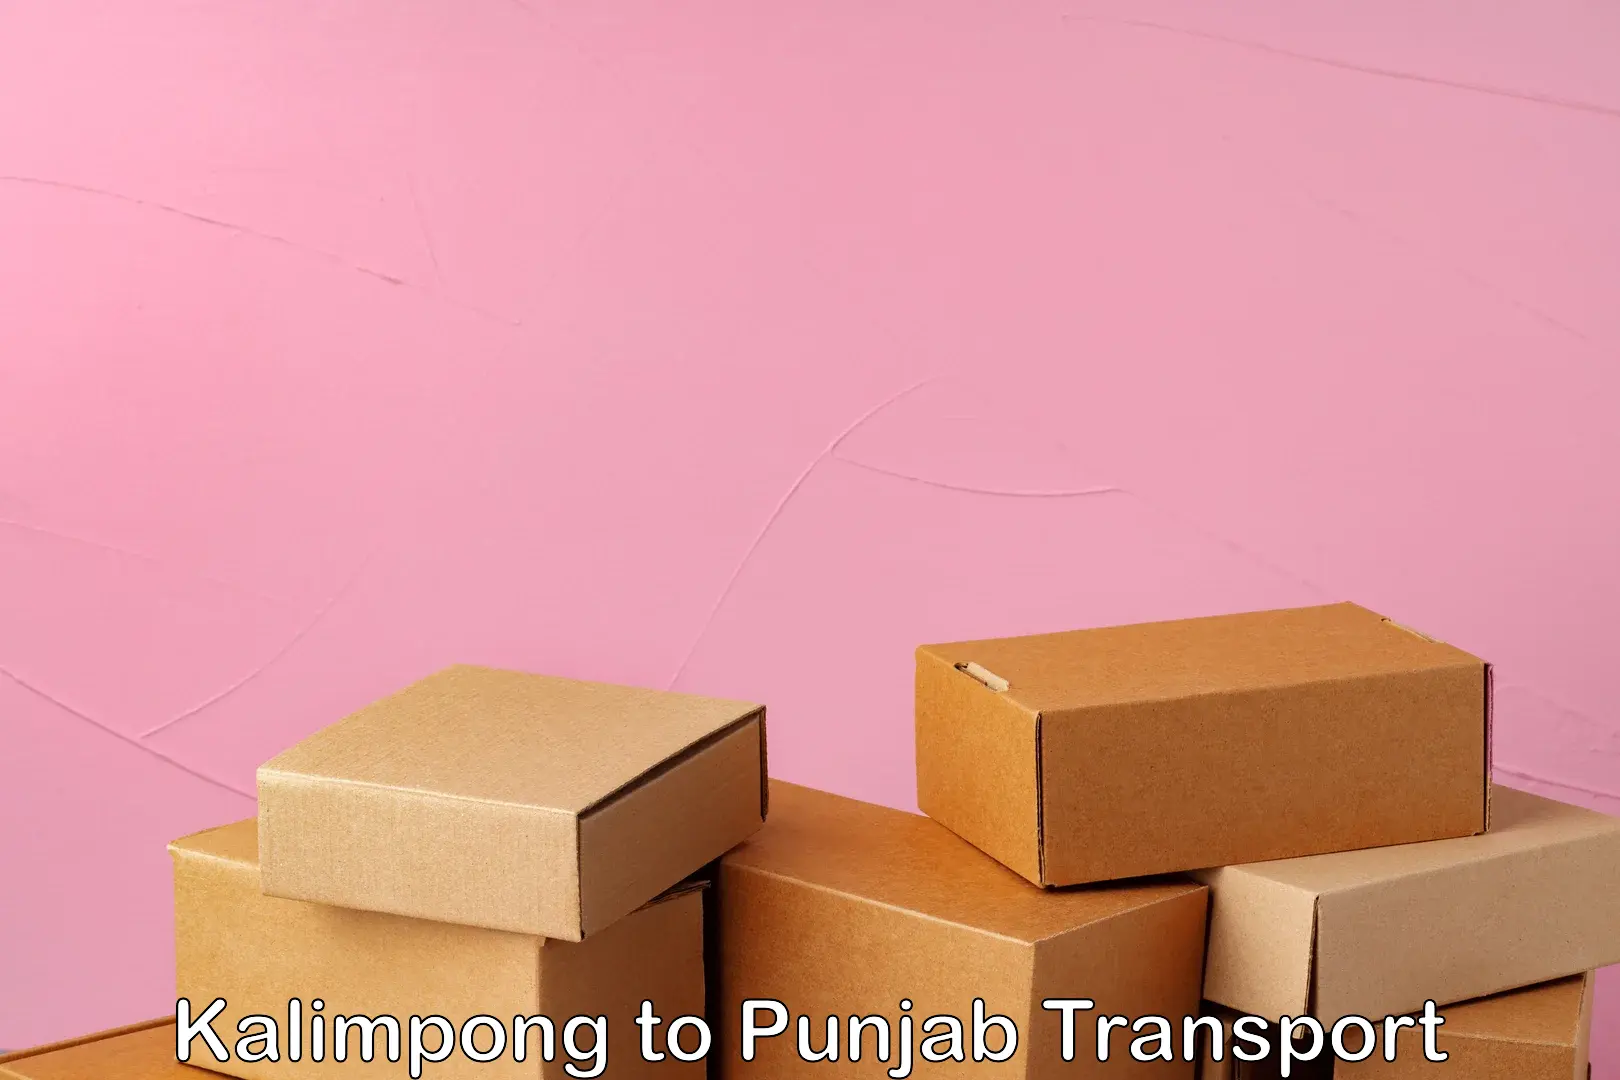 Delivery service Kalimpong to Punjab